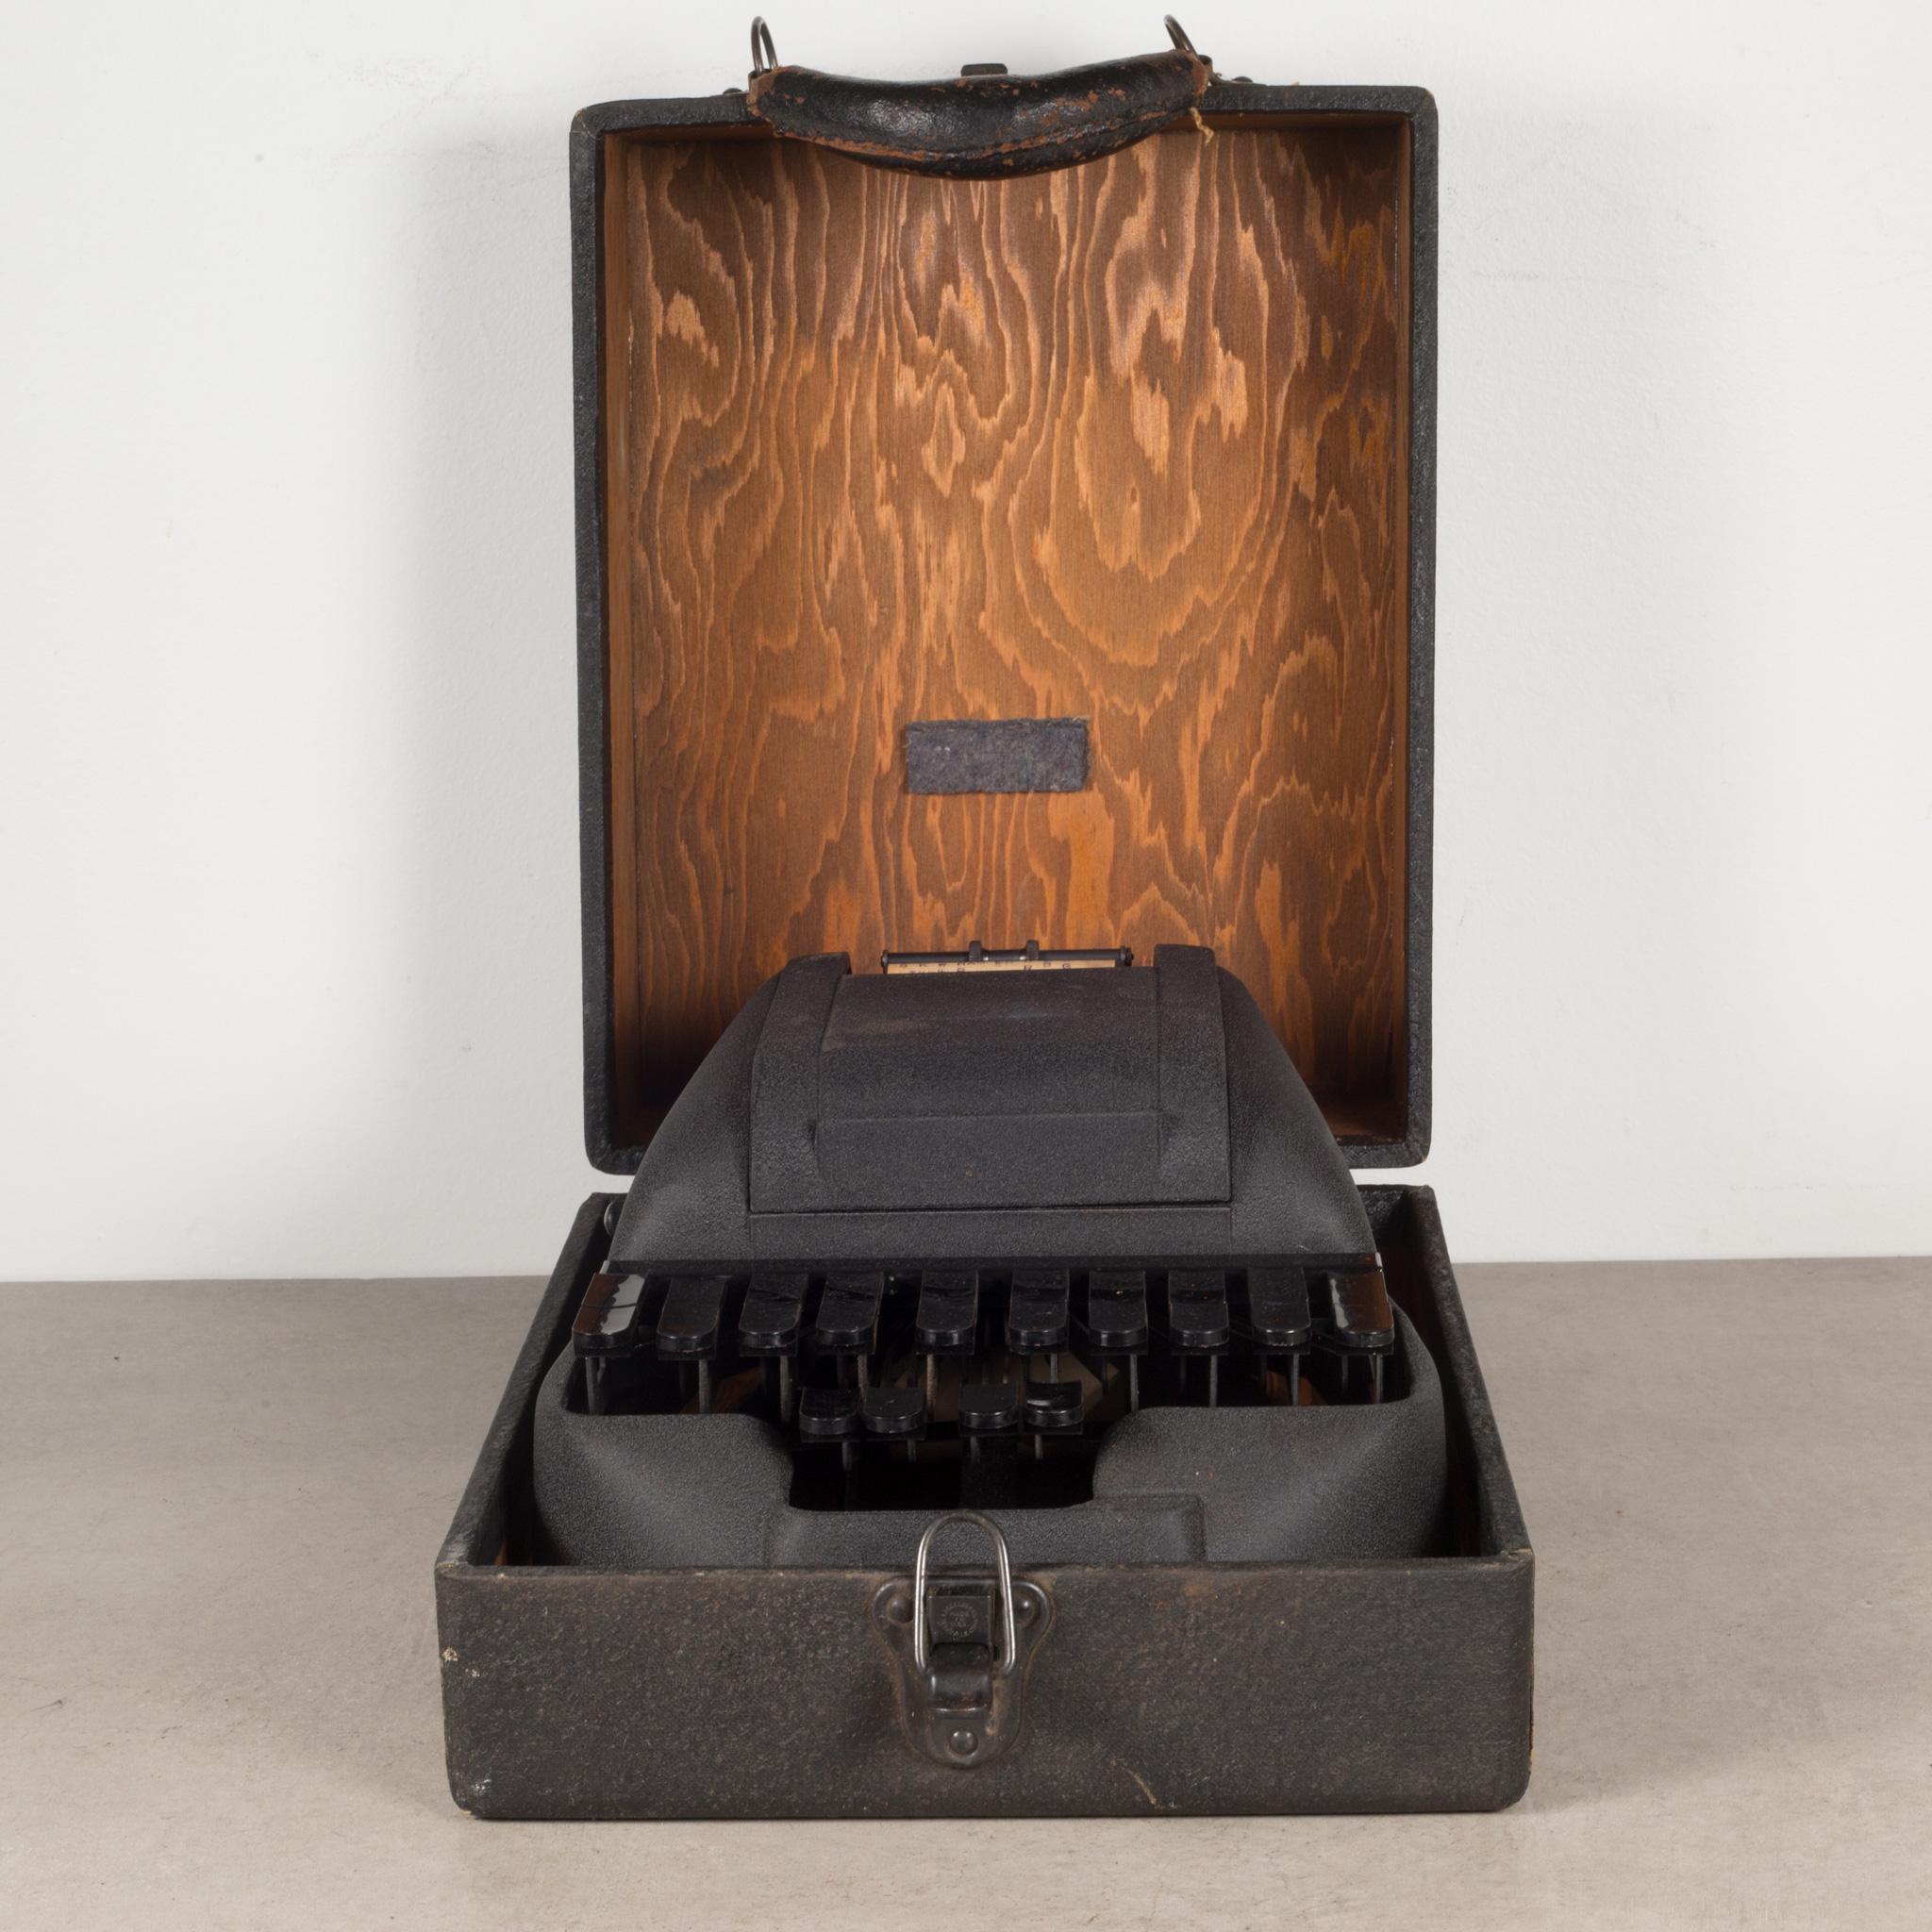 ABOUT

This is an original Art Deco Stenotype stenograph with Bakelite keys and original wooden case covered in leather. Leather handle on the case. All the keys work properly.

    CREATOR Stenotype Company, Chicago, IL. 
    DATE OF MANUFACTURE